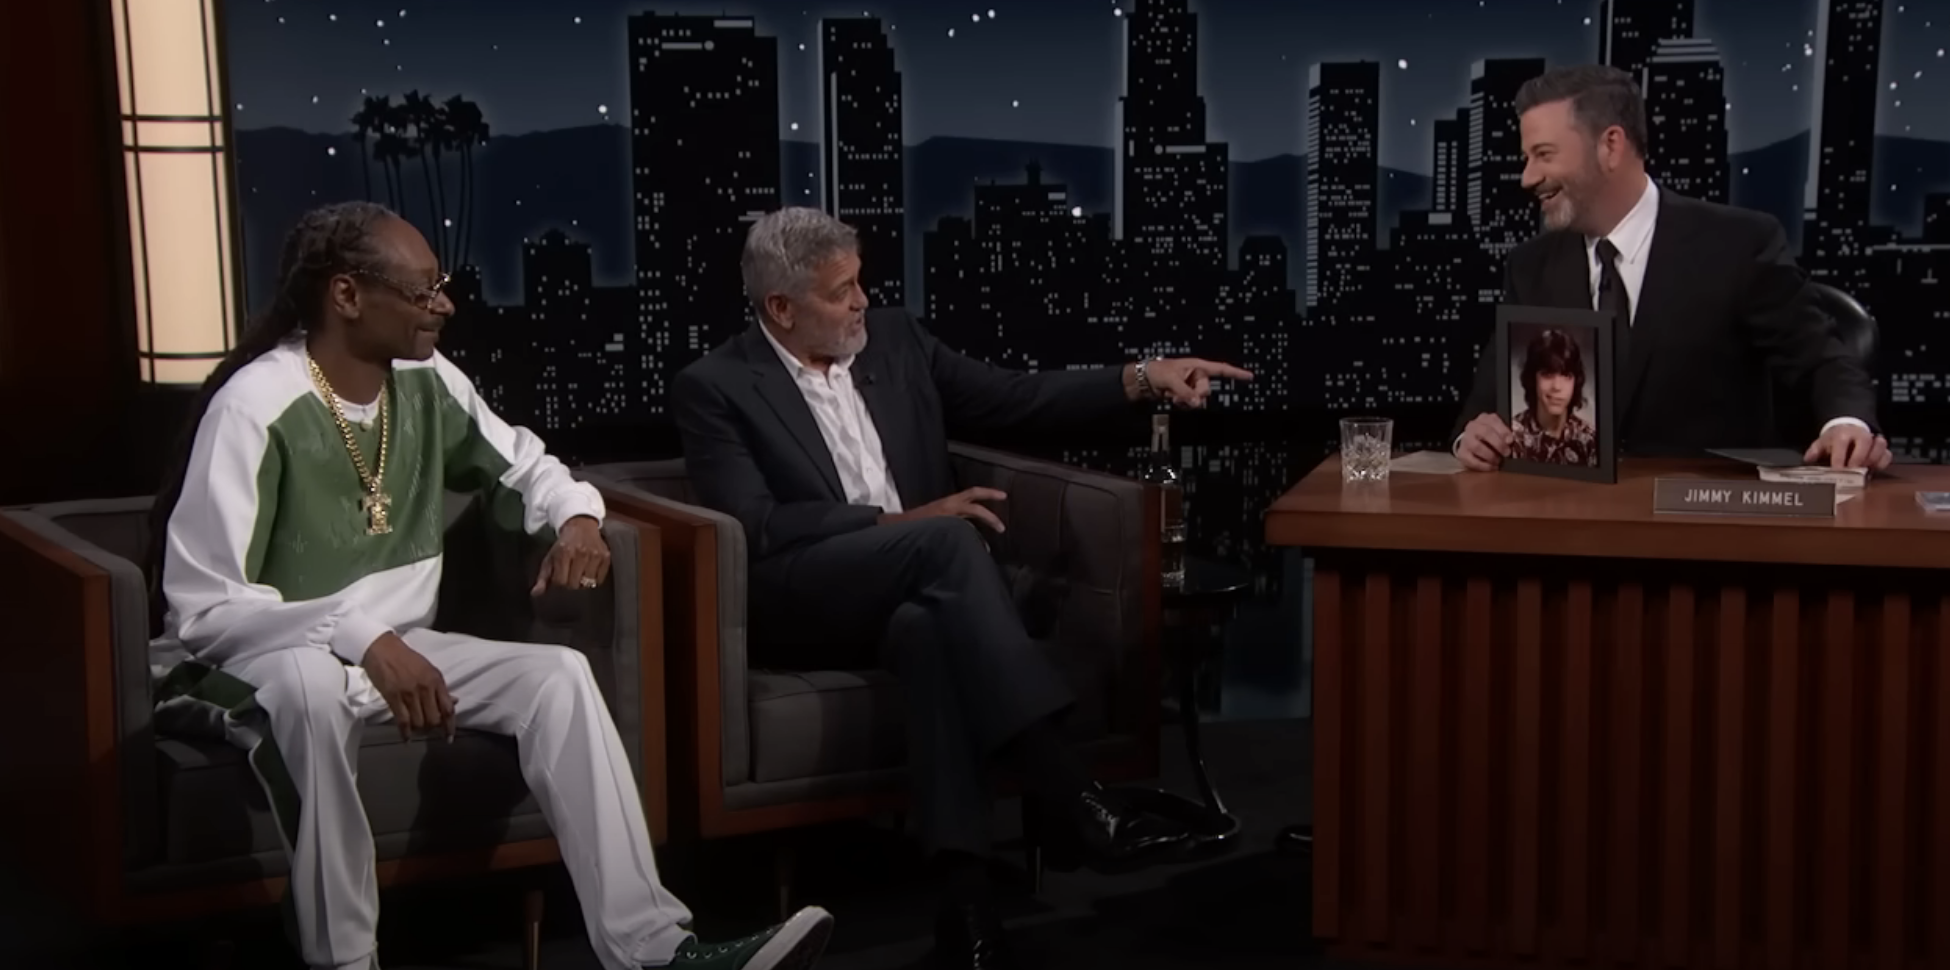 snoop and clooney sitting as guests with jimmy behind the desk